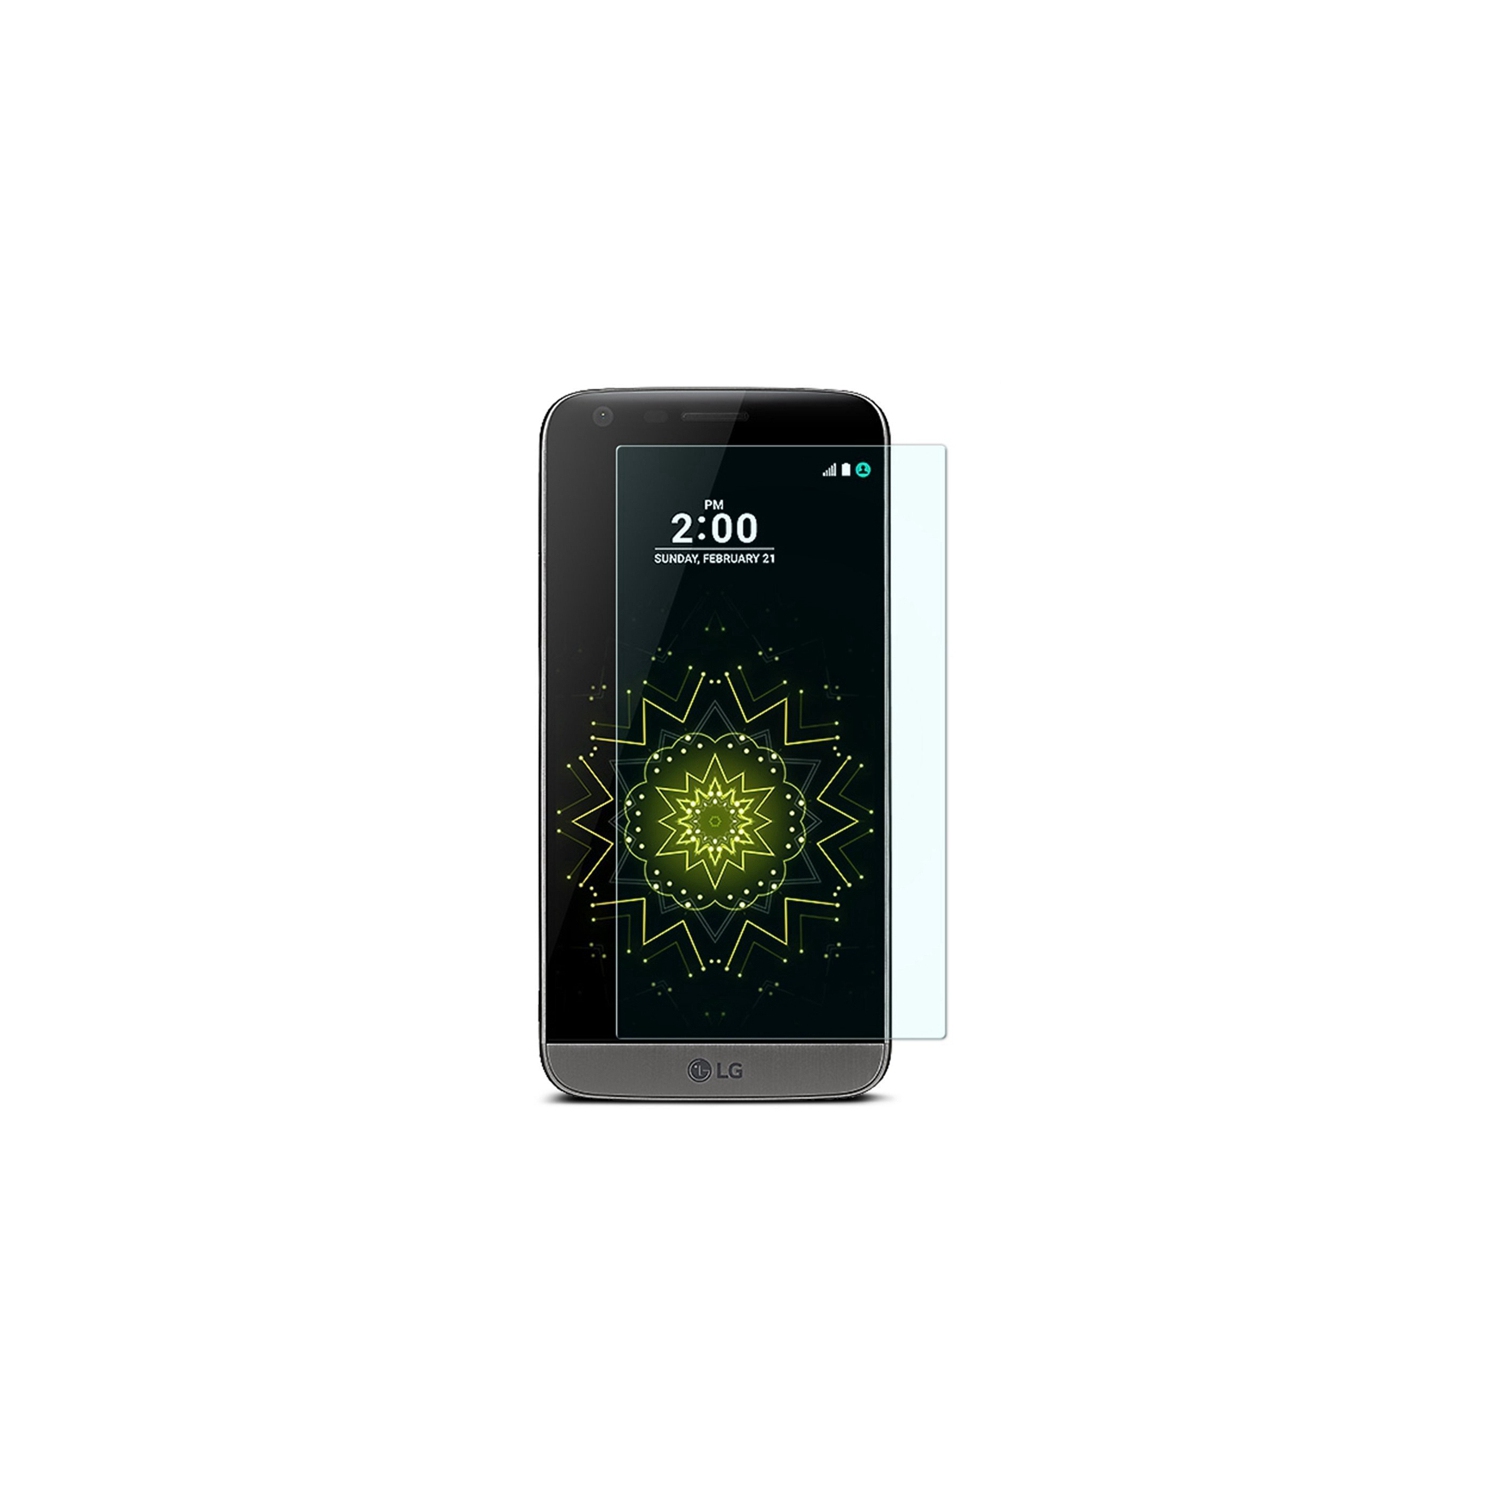 【2 Packs】 CSmart Premium Tempered Glass Screen Protector for LG G5, Case Friendly & Bubble Free